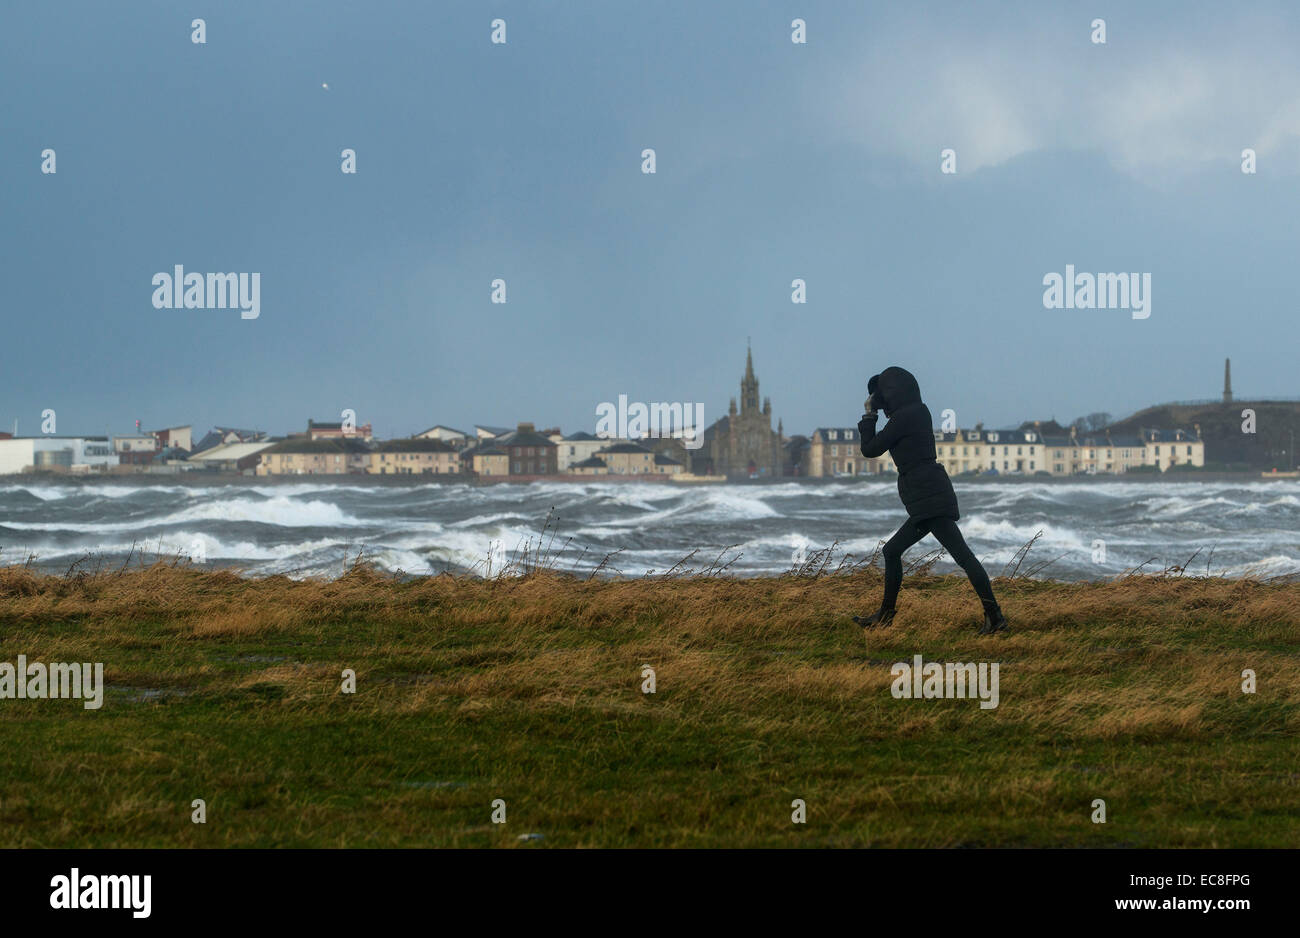 A woman walks along the coast as the waves crash over the promenade wall on December 10, 2014 in Saltcoats, Scotland. Stock Photo